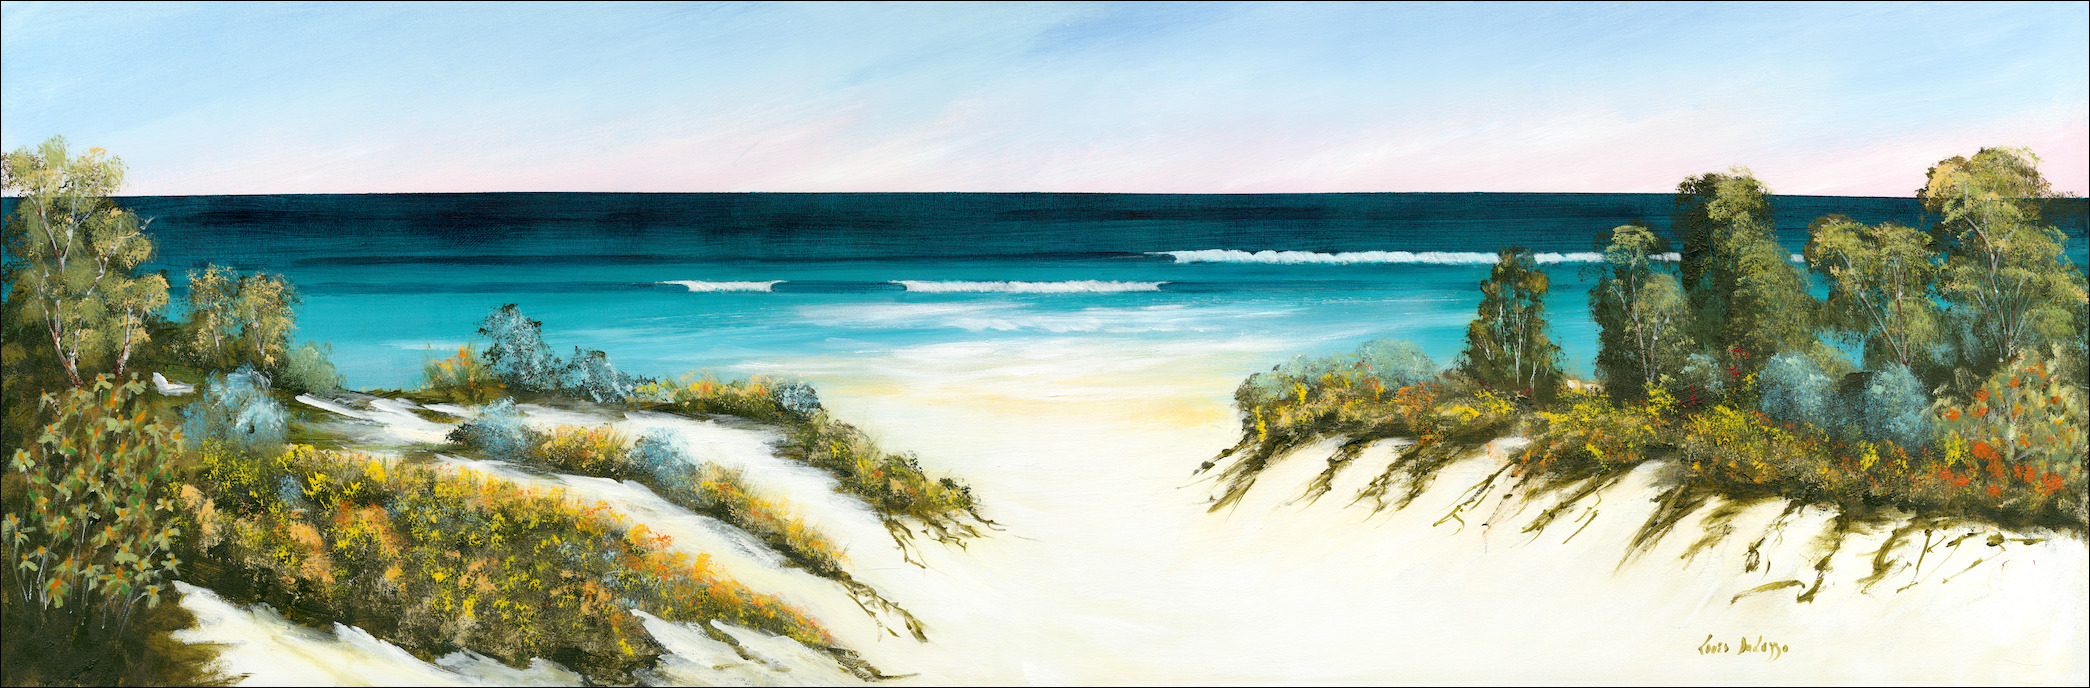 Beach Seascape Painting "Glorious Day Fraser Island" by Louis Dalozzo